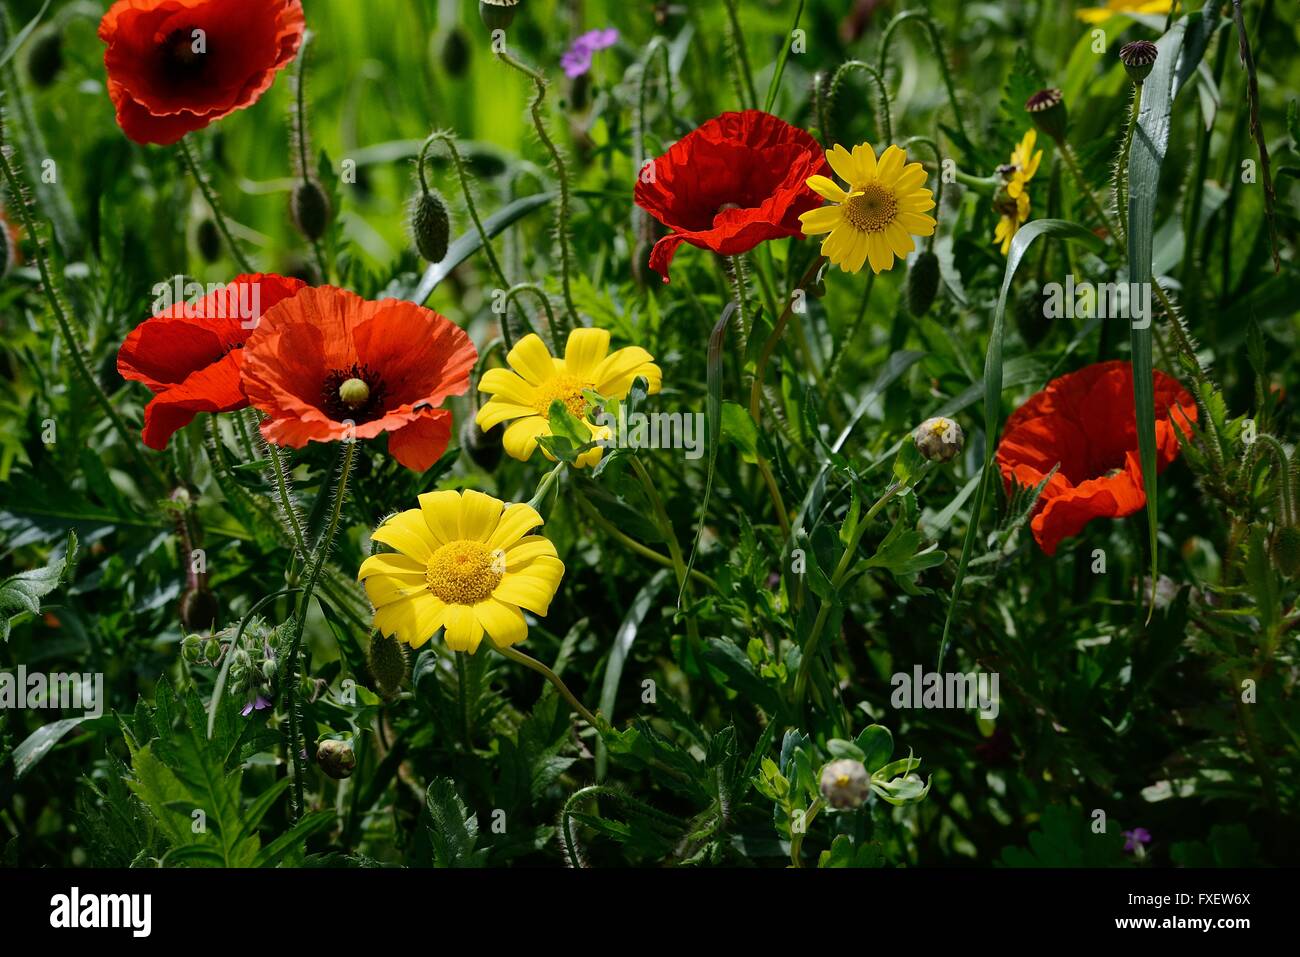 Poppy and yellow flowers amid grass Stock Photo